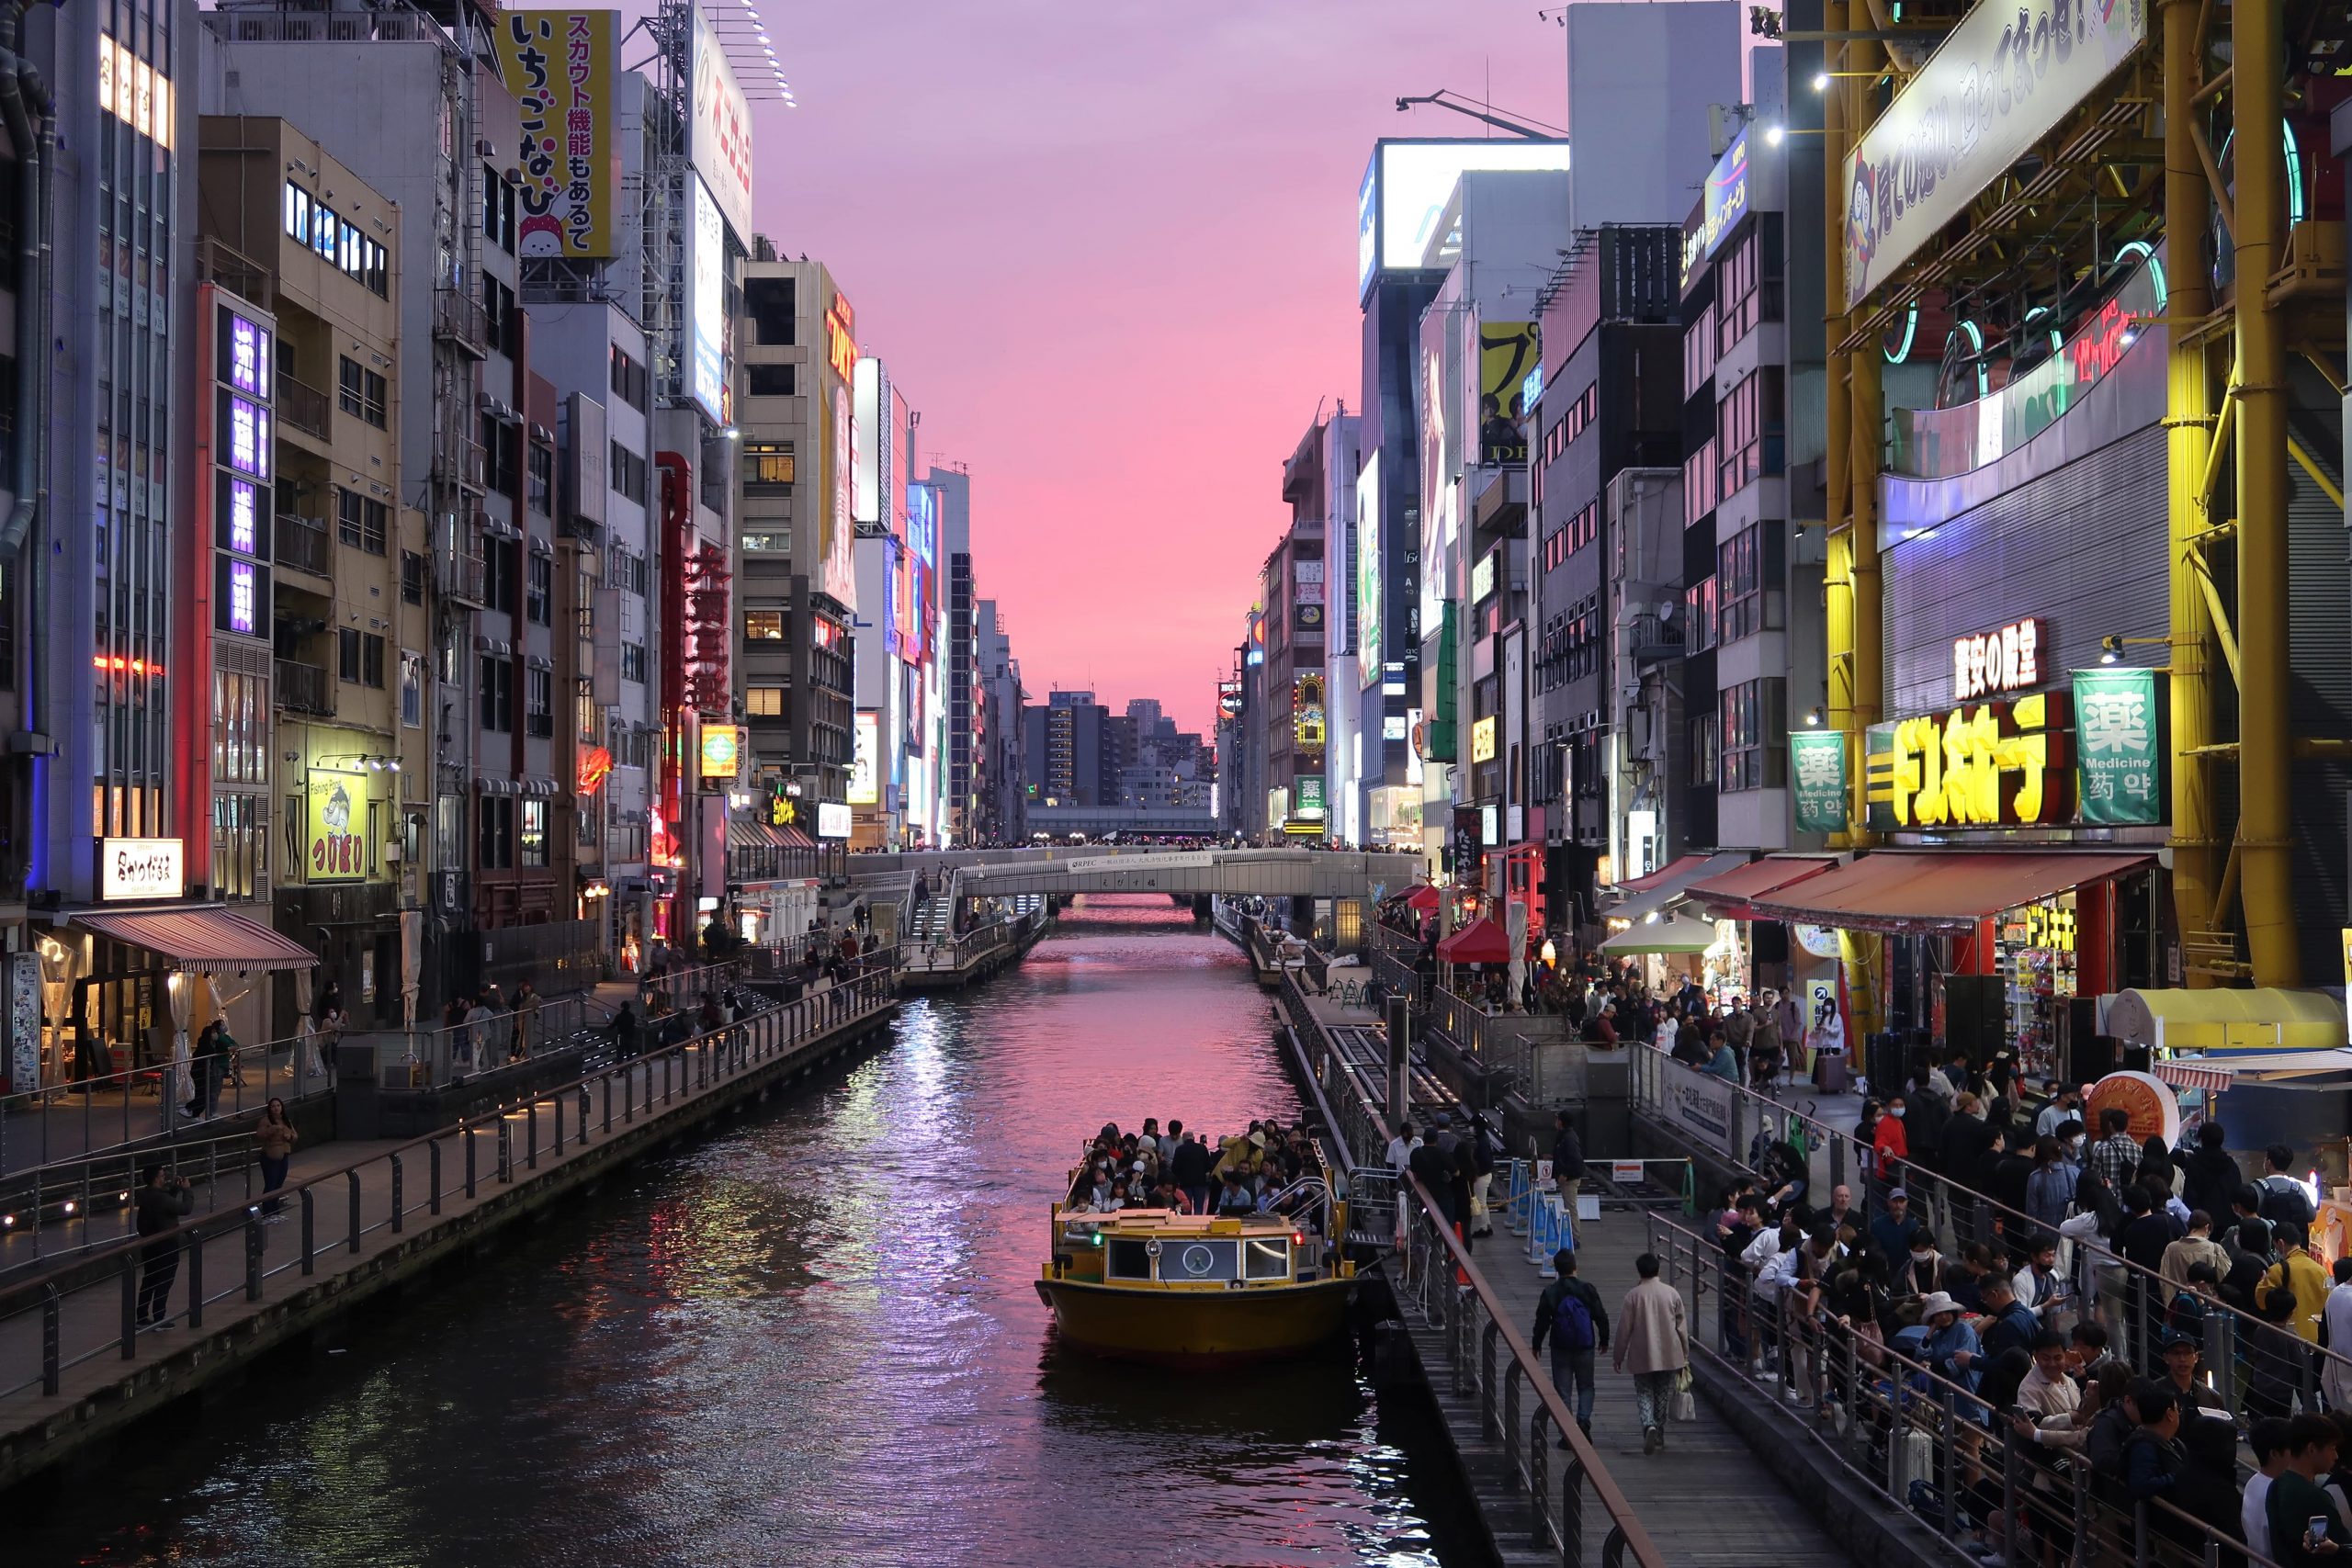 dotonbori canal osaka sunset things to see and do day trip from kyoto cherry blossoms itinerary